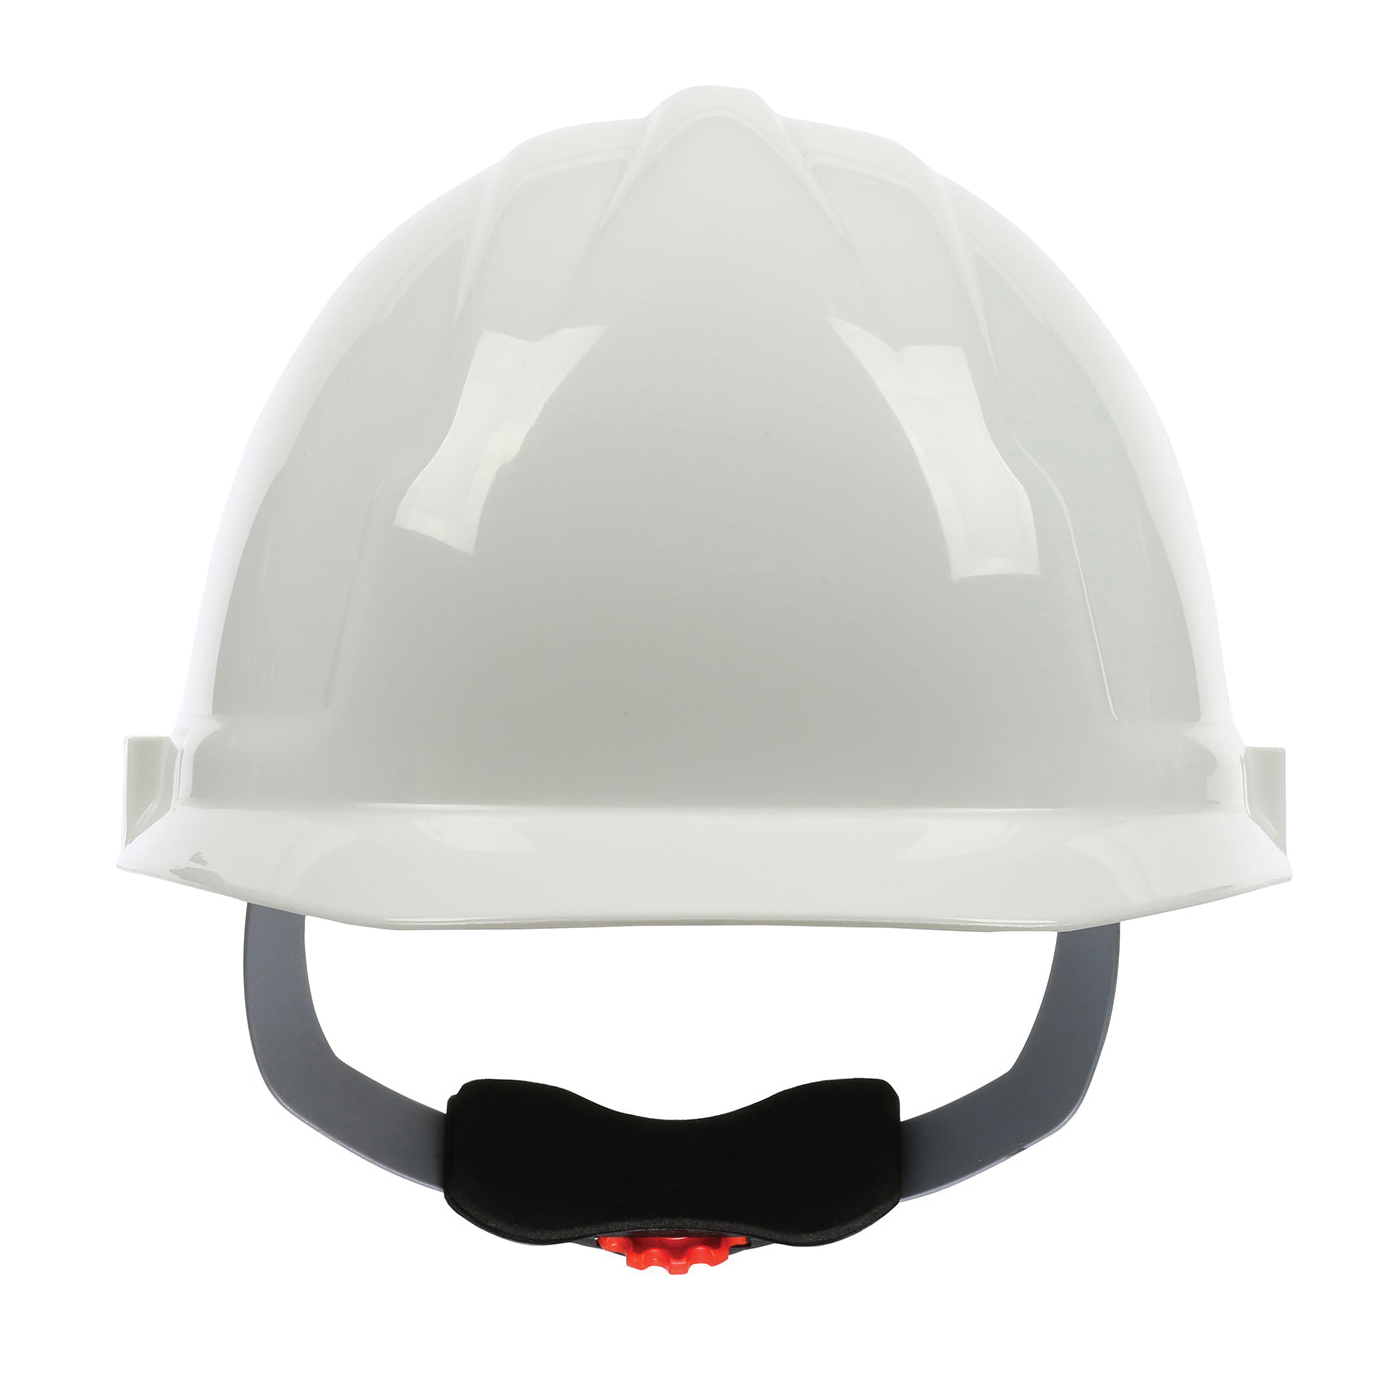 PIP® 280-CW4200-10 Cap Style Hard Hat, SZ 6-5/8 Fits Mini Hat, SZ 8 Fits Max Hat, HDPE/Polyester, 4-Point Suspension, ANSI Electrical Class Rating: Class E, ANSI Impact Rating: ANSI Z89.1, Wheel Ratchet Adjustment